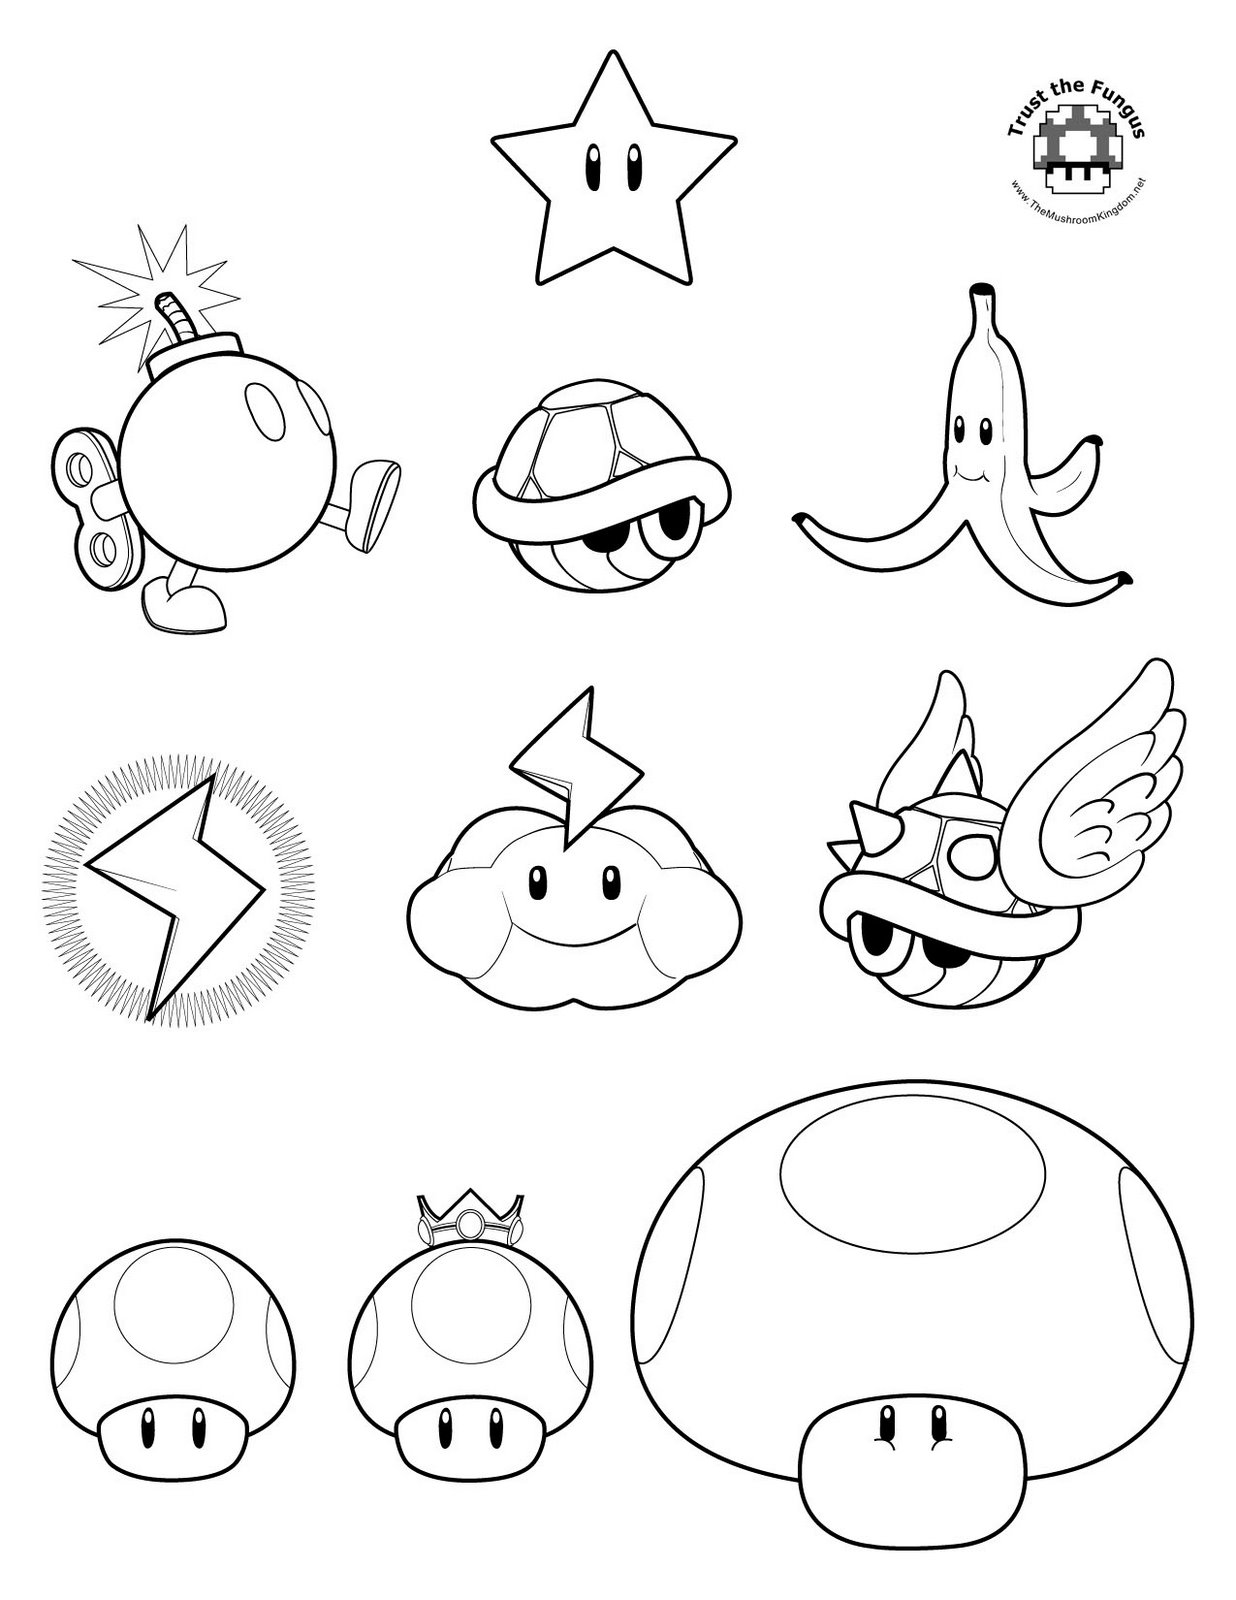 Mario Coloring pages - Black and white super Mario ...